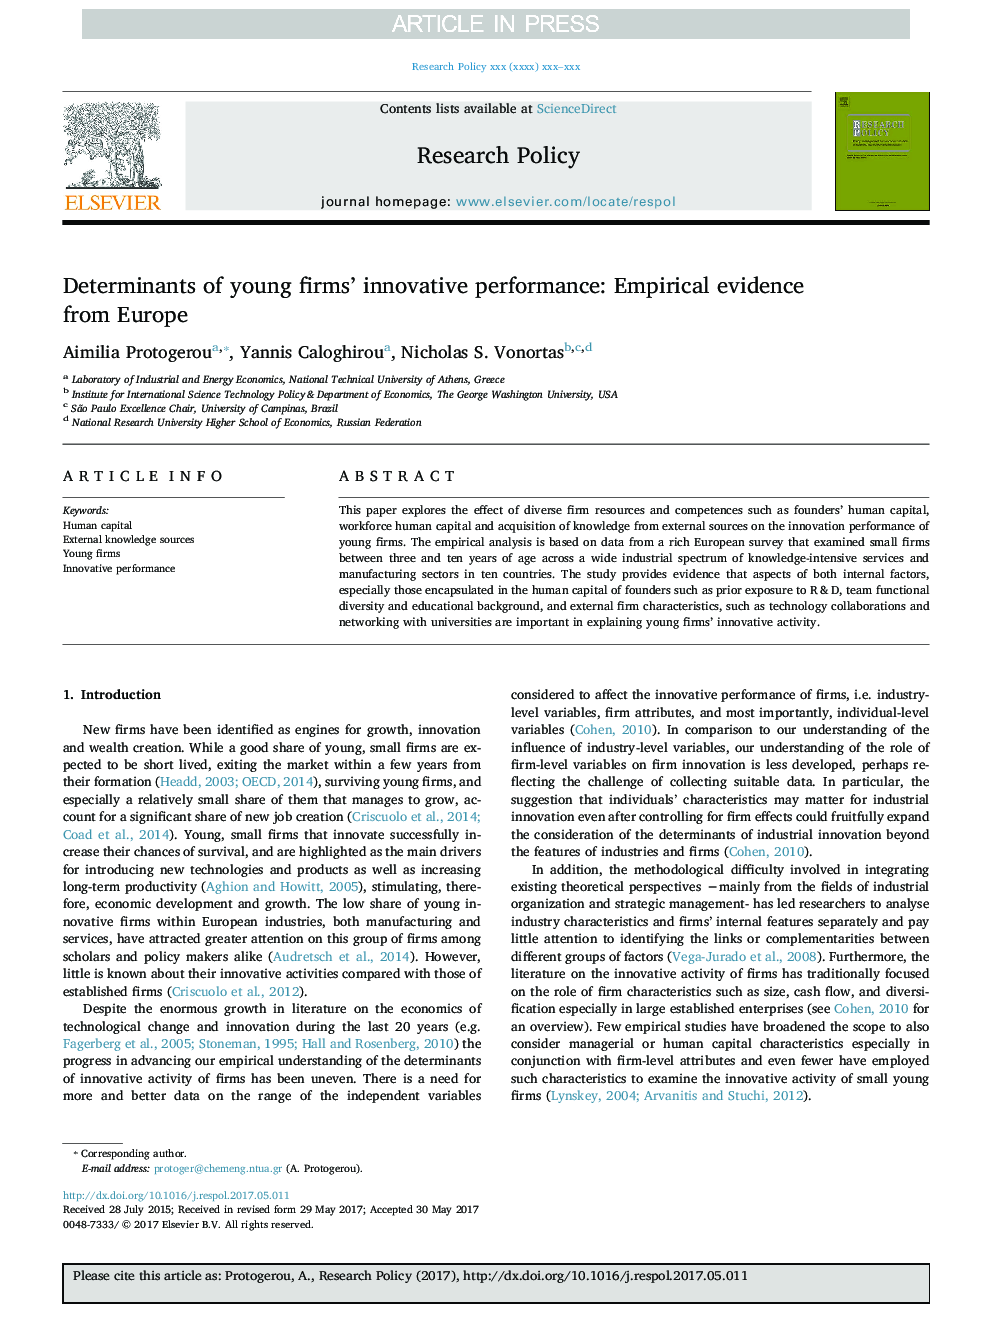 Determinants of young firms' innovative performance: Empirical evidence from Europe